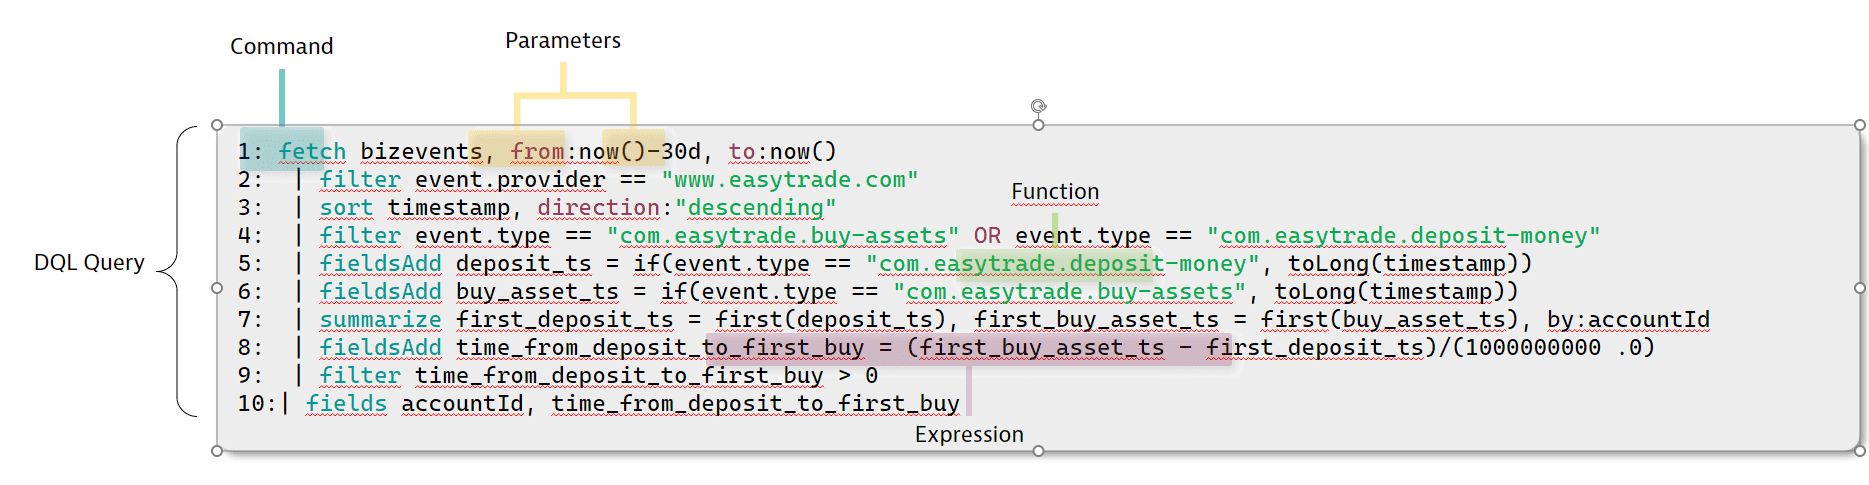 DQL query illustrating time elapsed between events in seconds